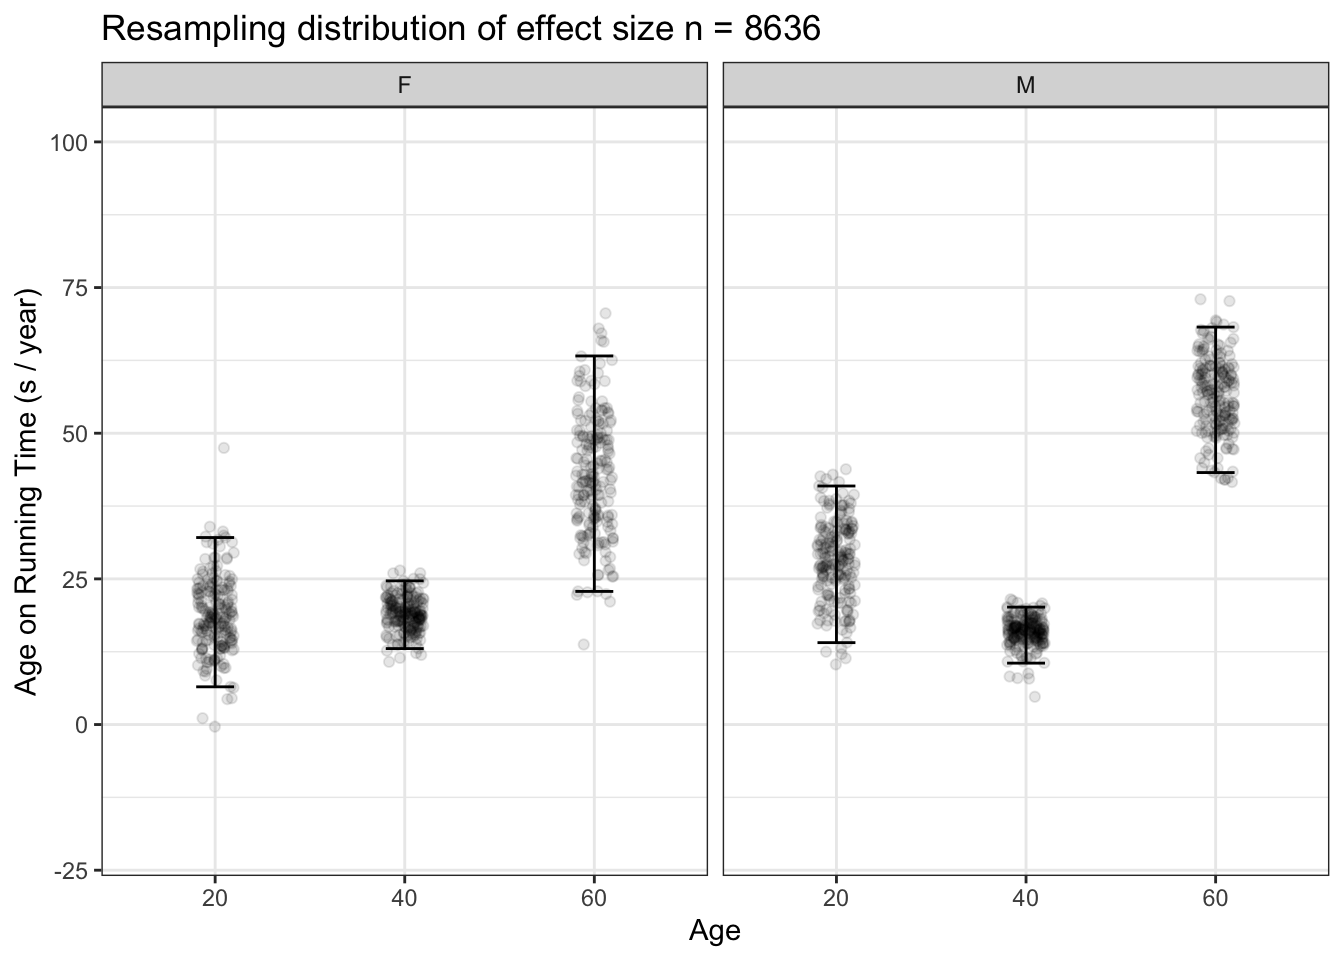 200 resampling trials with n = 8636, that is, the whole population, comparing the effect size of age on running time at ages 20, 40, and 60 years. The differences in effect size for men at age 40 and 60 are evident: the confidence intervals do not overlap.